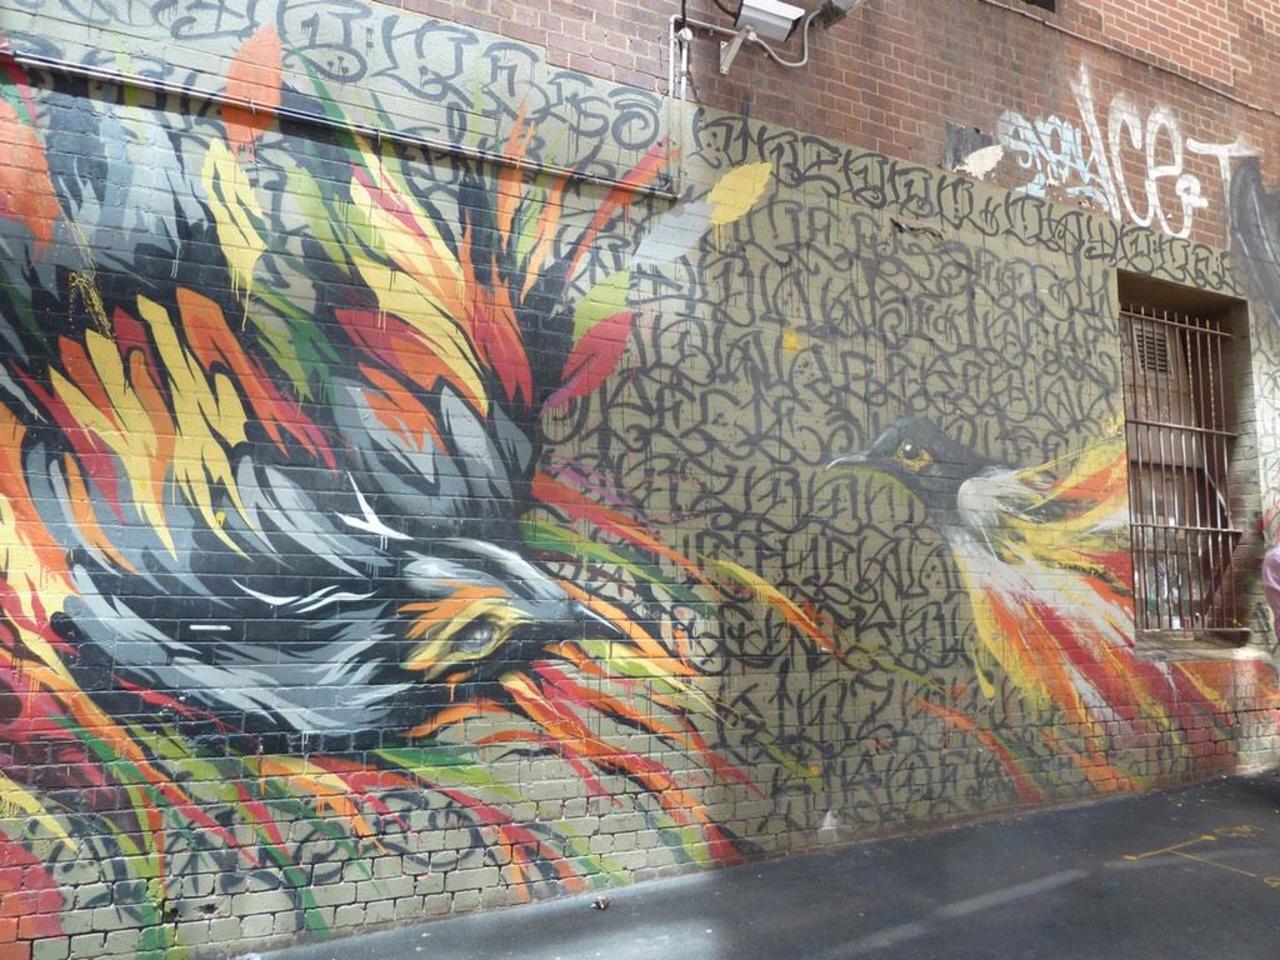 A favourite piece of mine from my recent trip to Melbourne #streetart by #houseofmeggs & #mayonaize #graffiti #mural http://t.co/8MiUdJLZBN